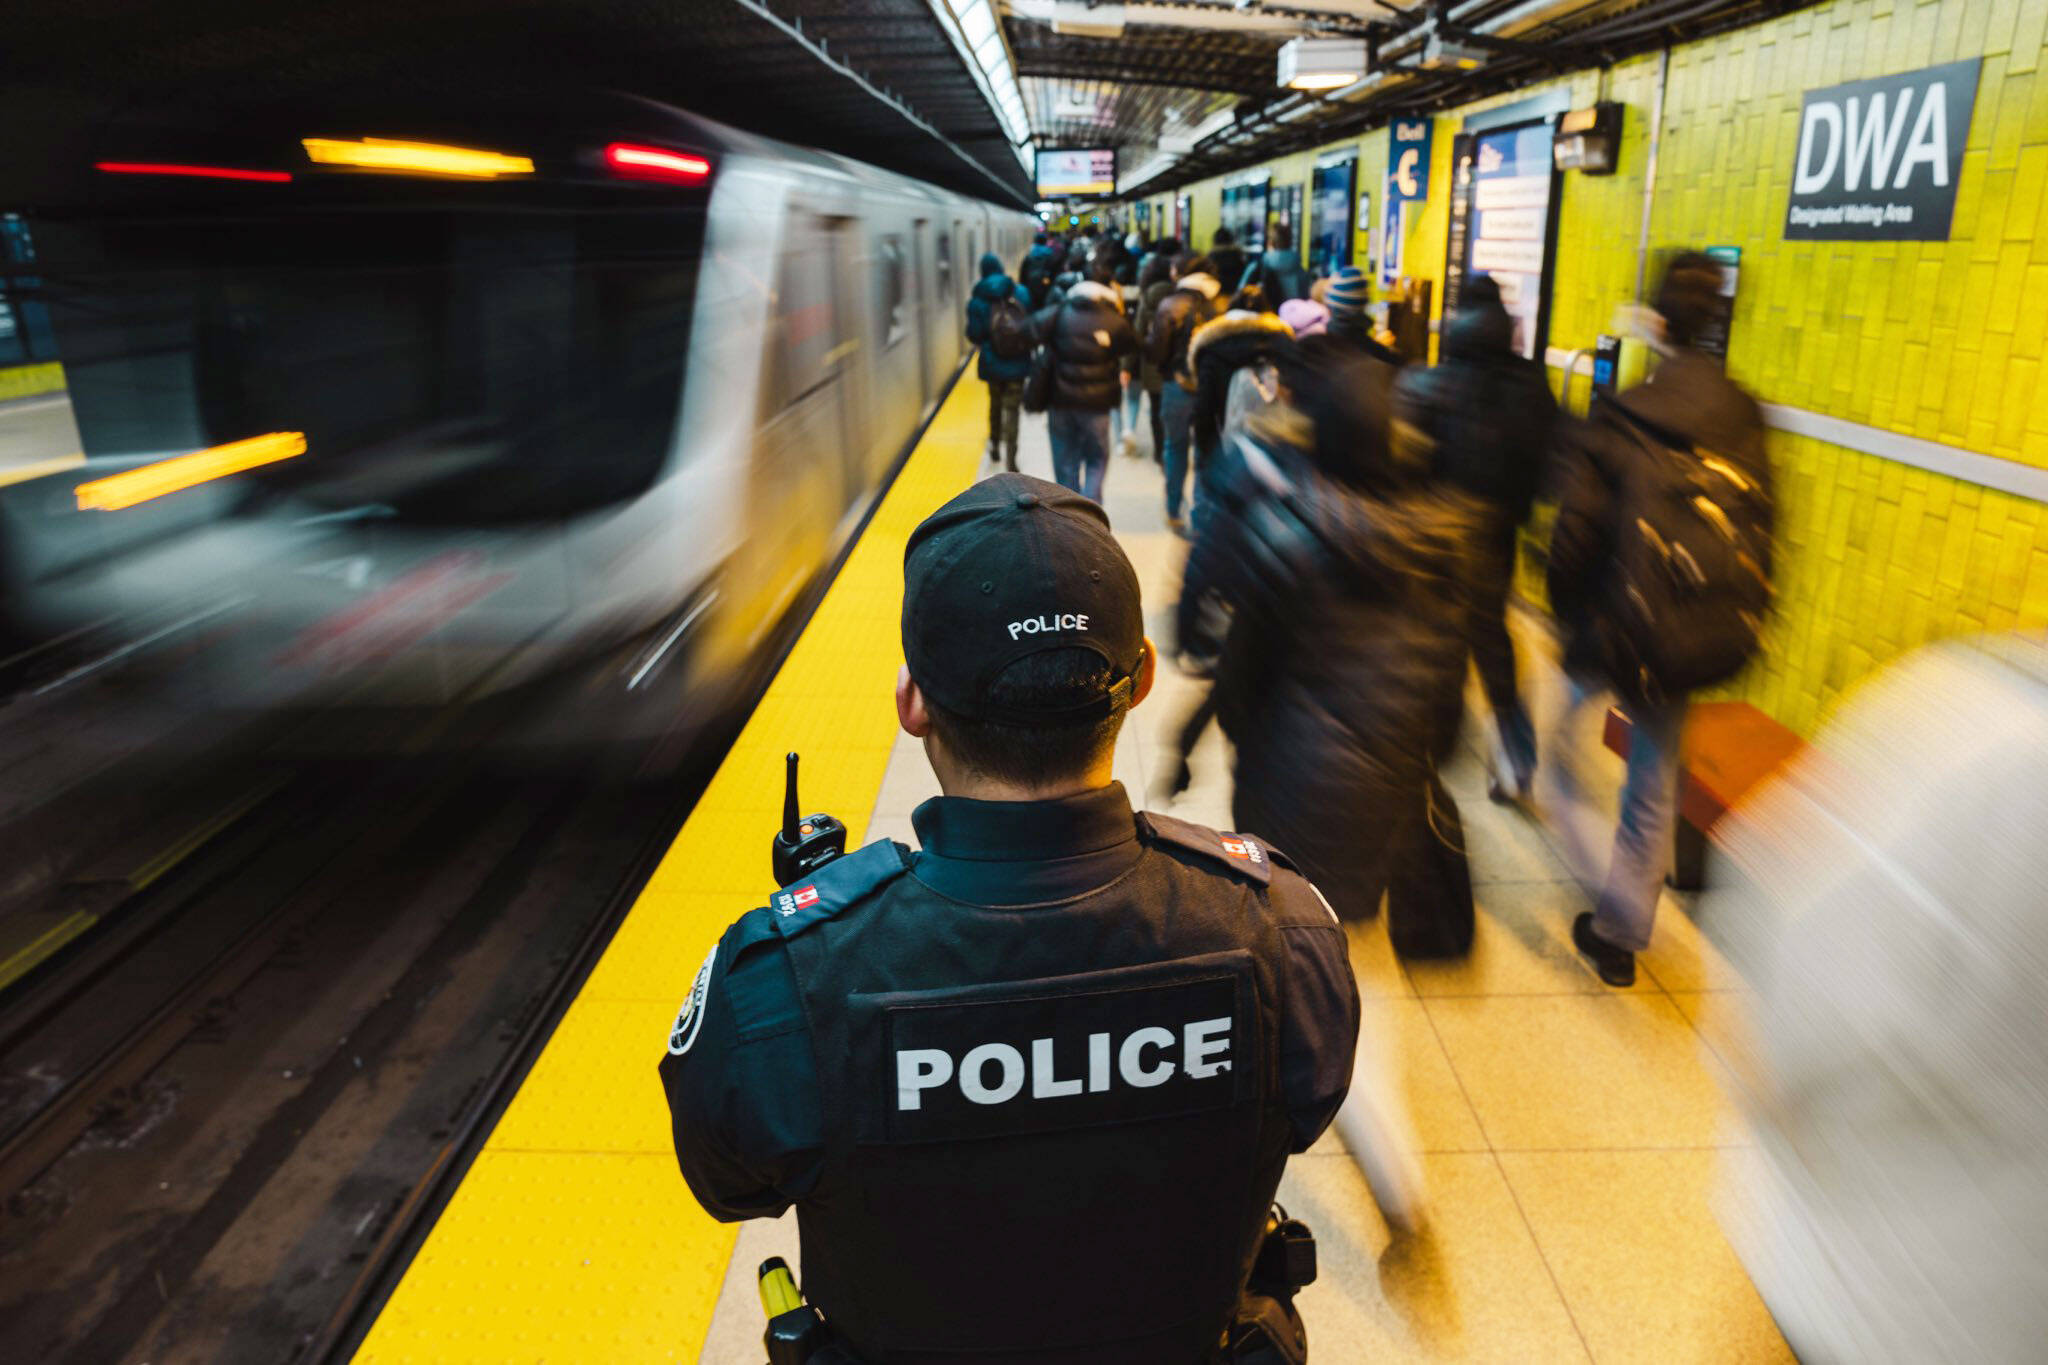 ttc police officers